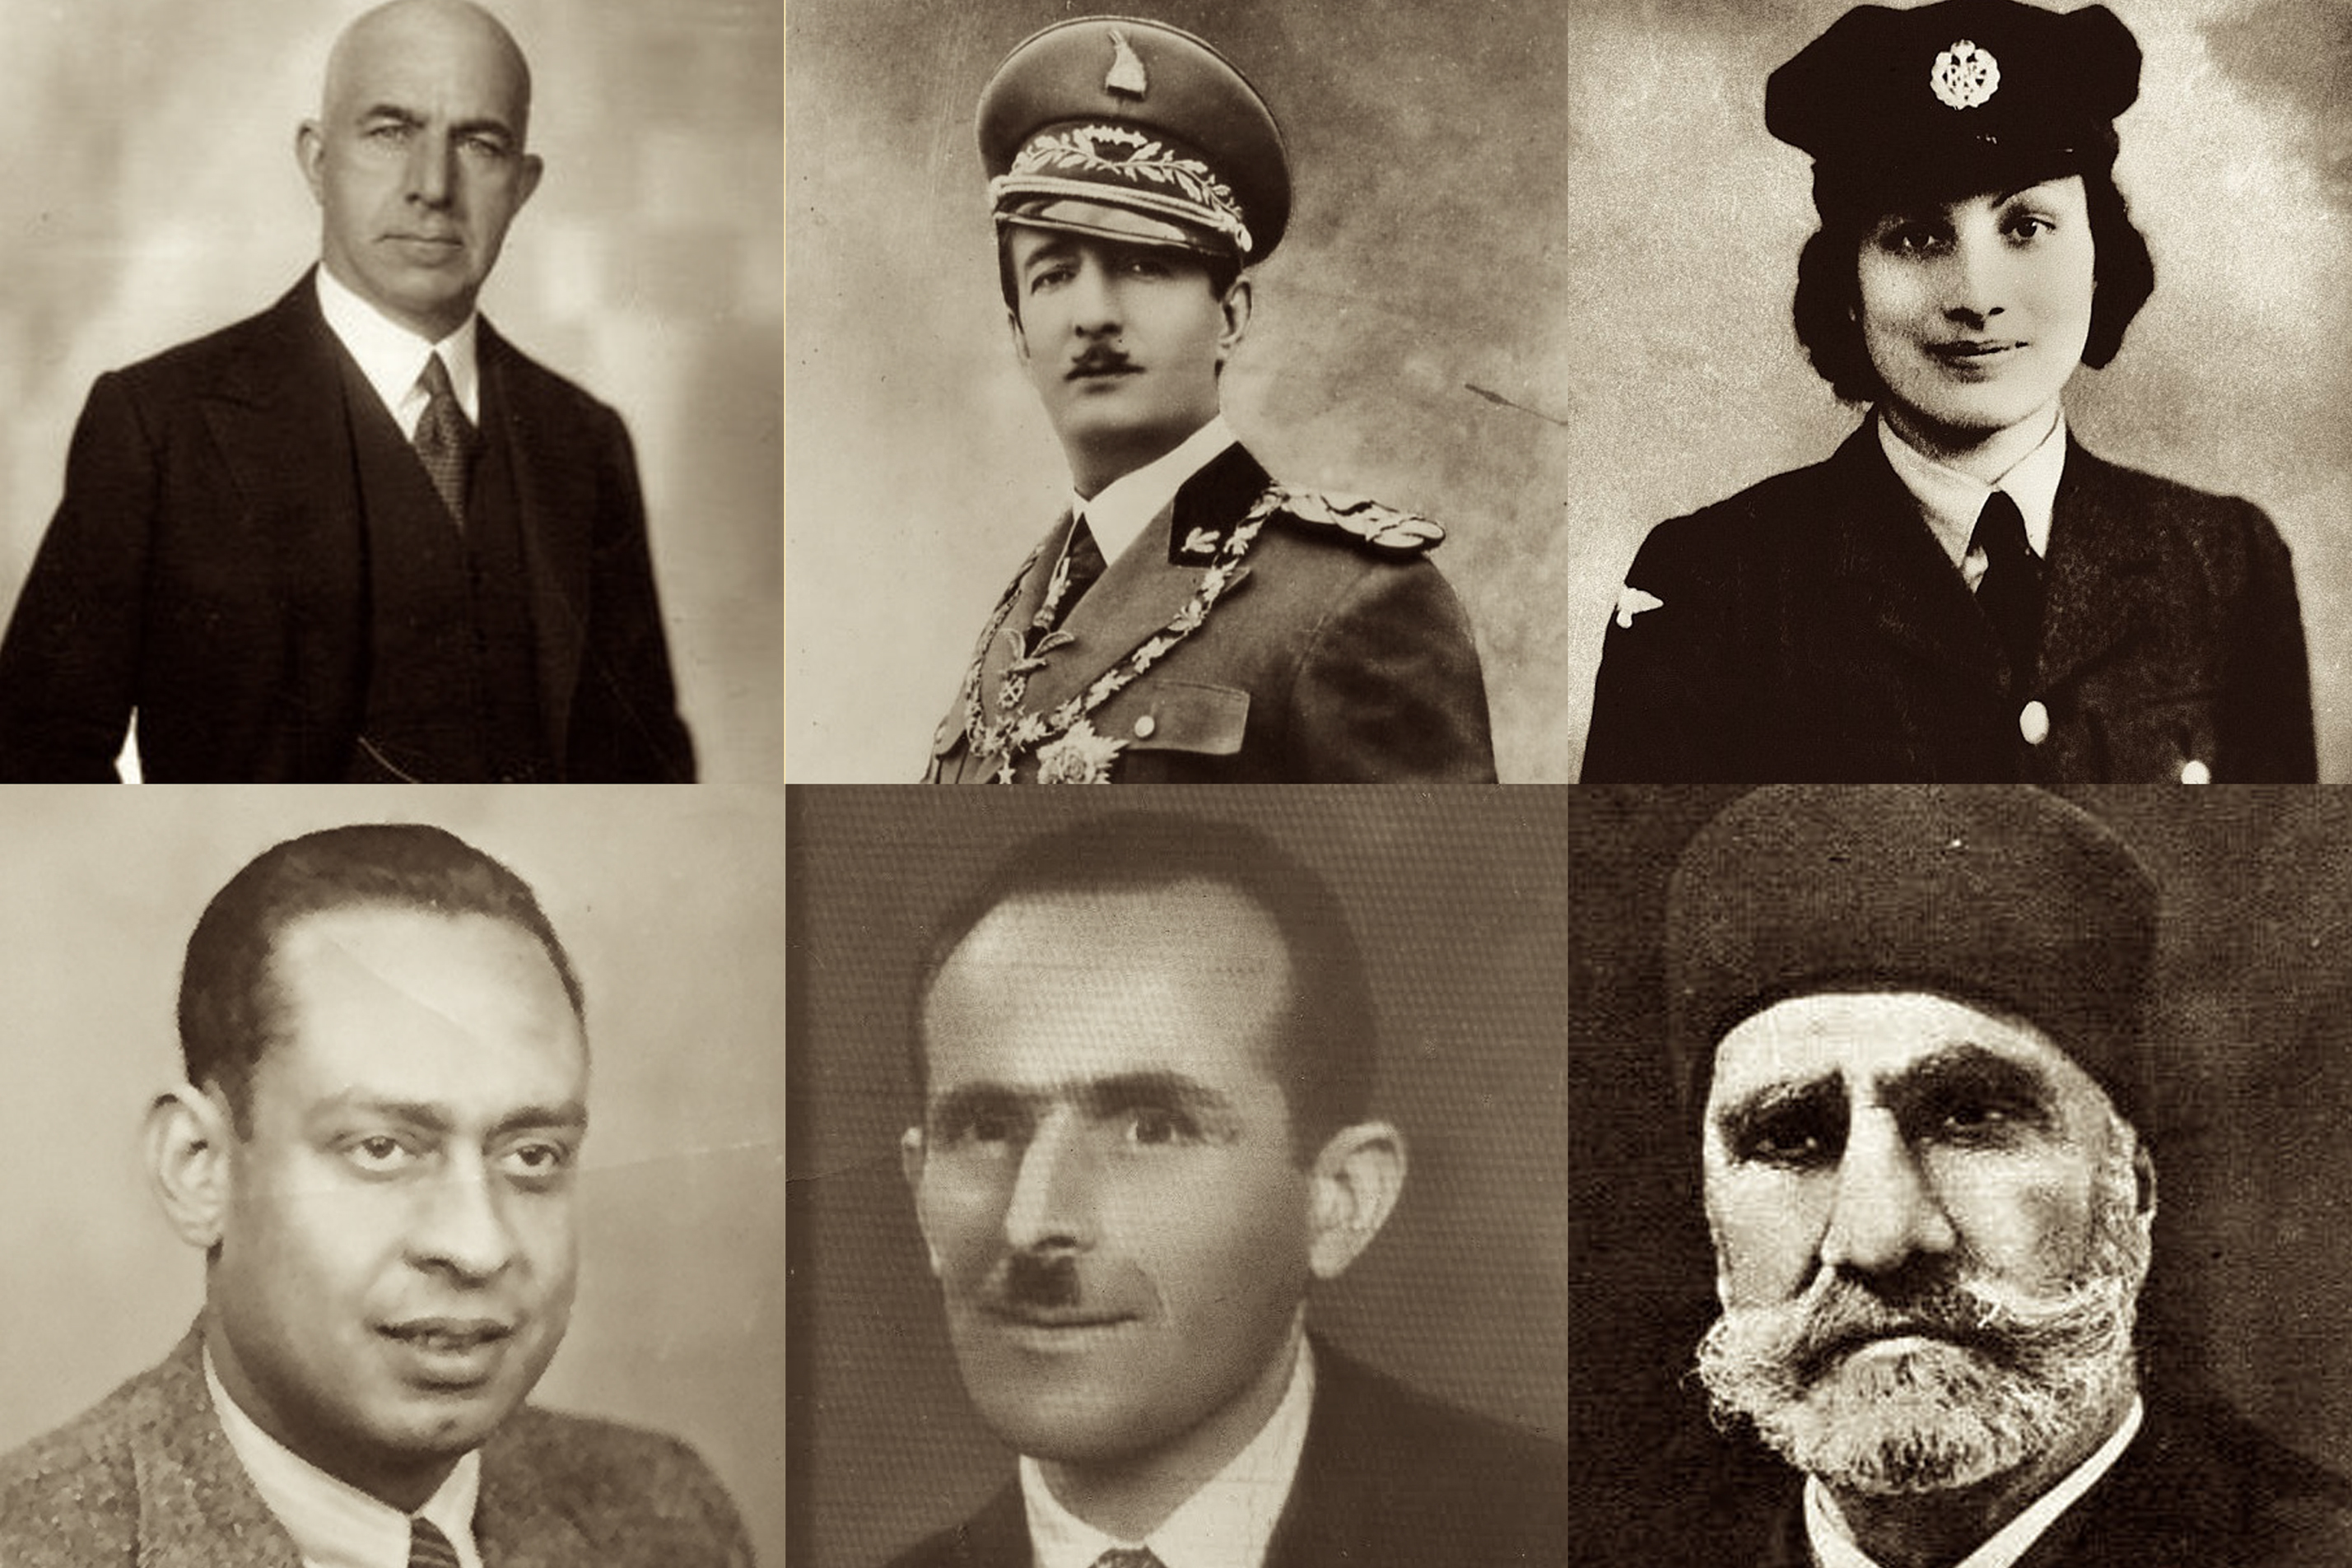 (Top row, left to right) Behic Erkin, King Zog I of Albania, Noor Inayat Khan; (Bottom row, left to right) Mohamed Helmy, Rifat Abdyl Hoxha, Ahmed Pasha Bey (I Am Your Protector)